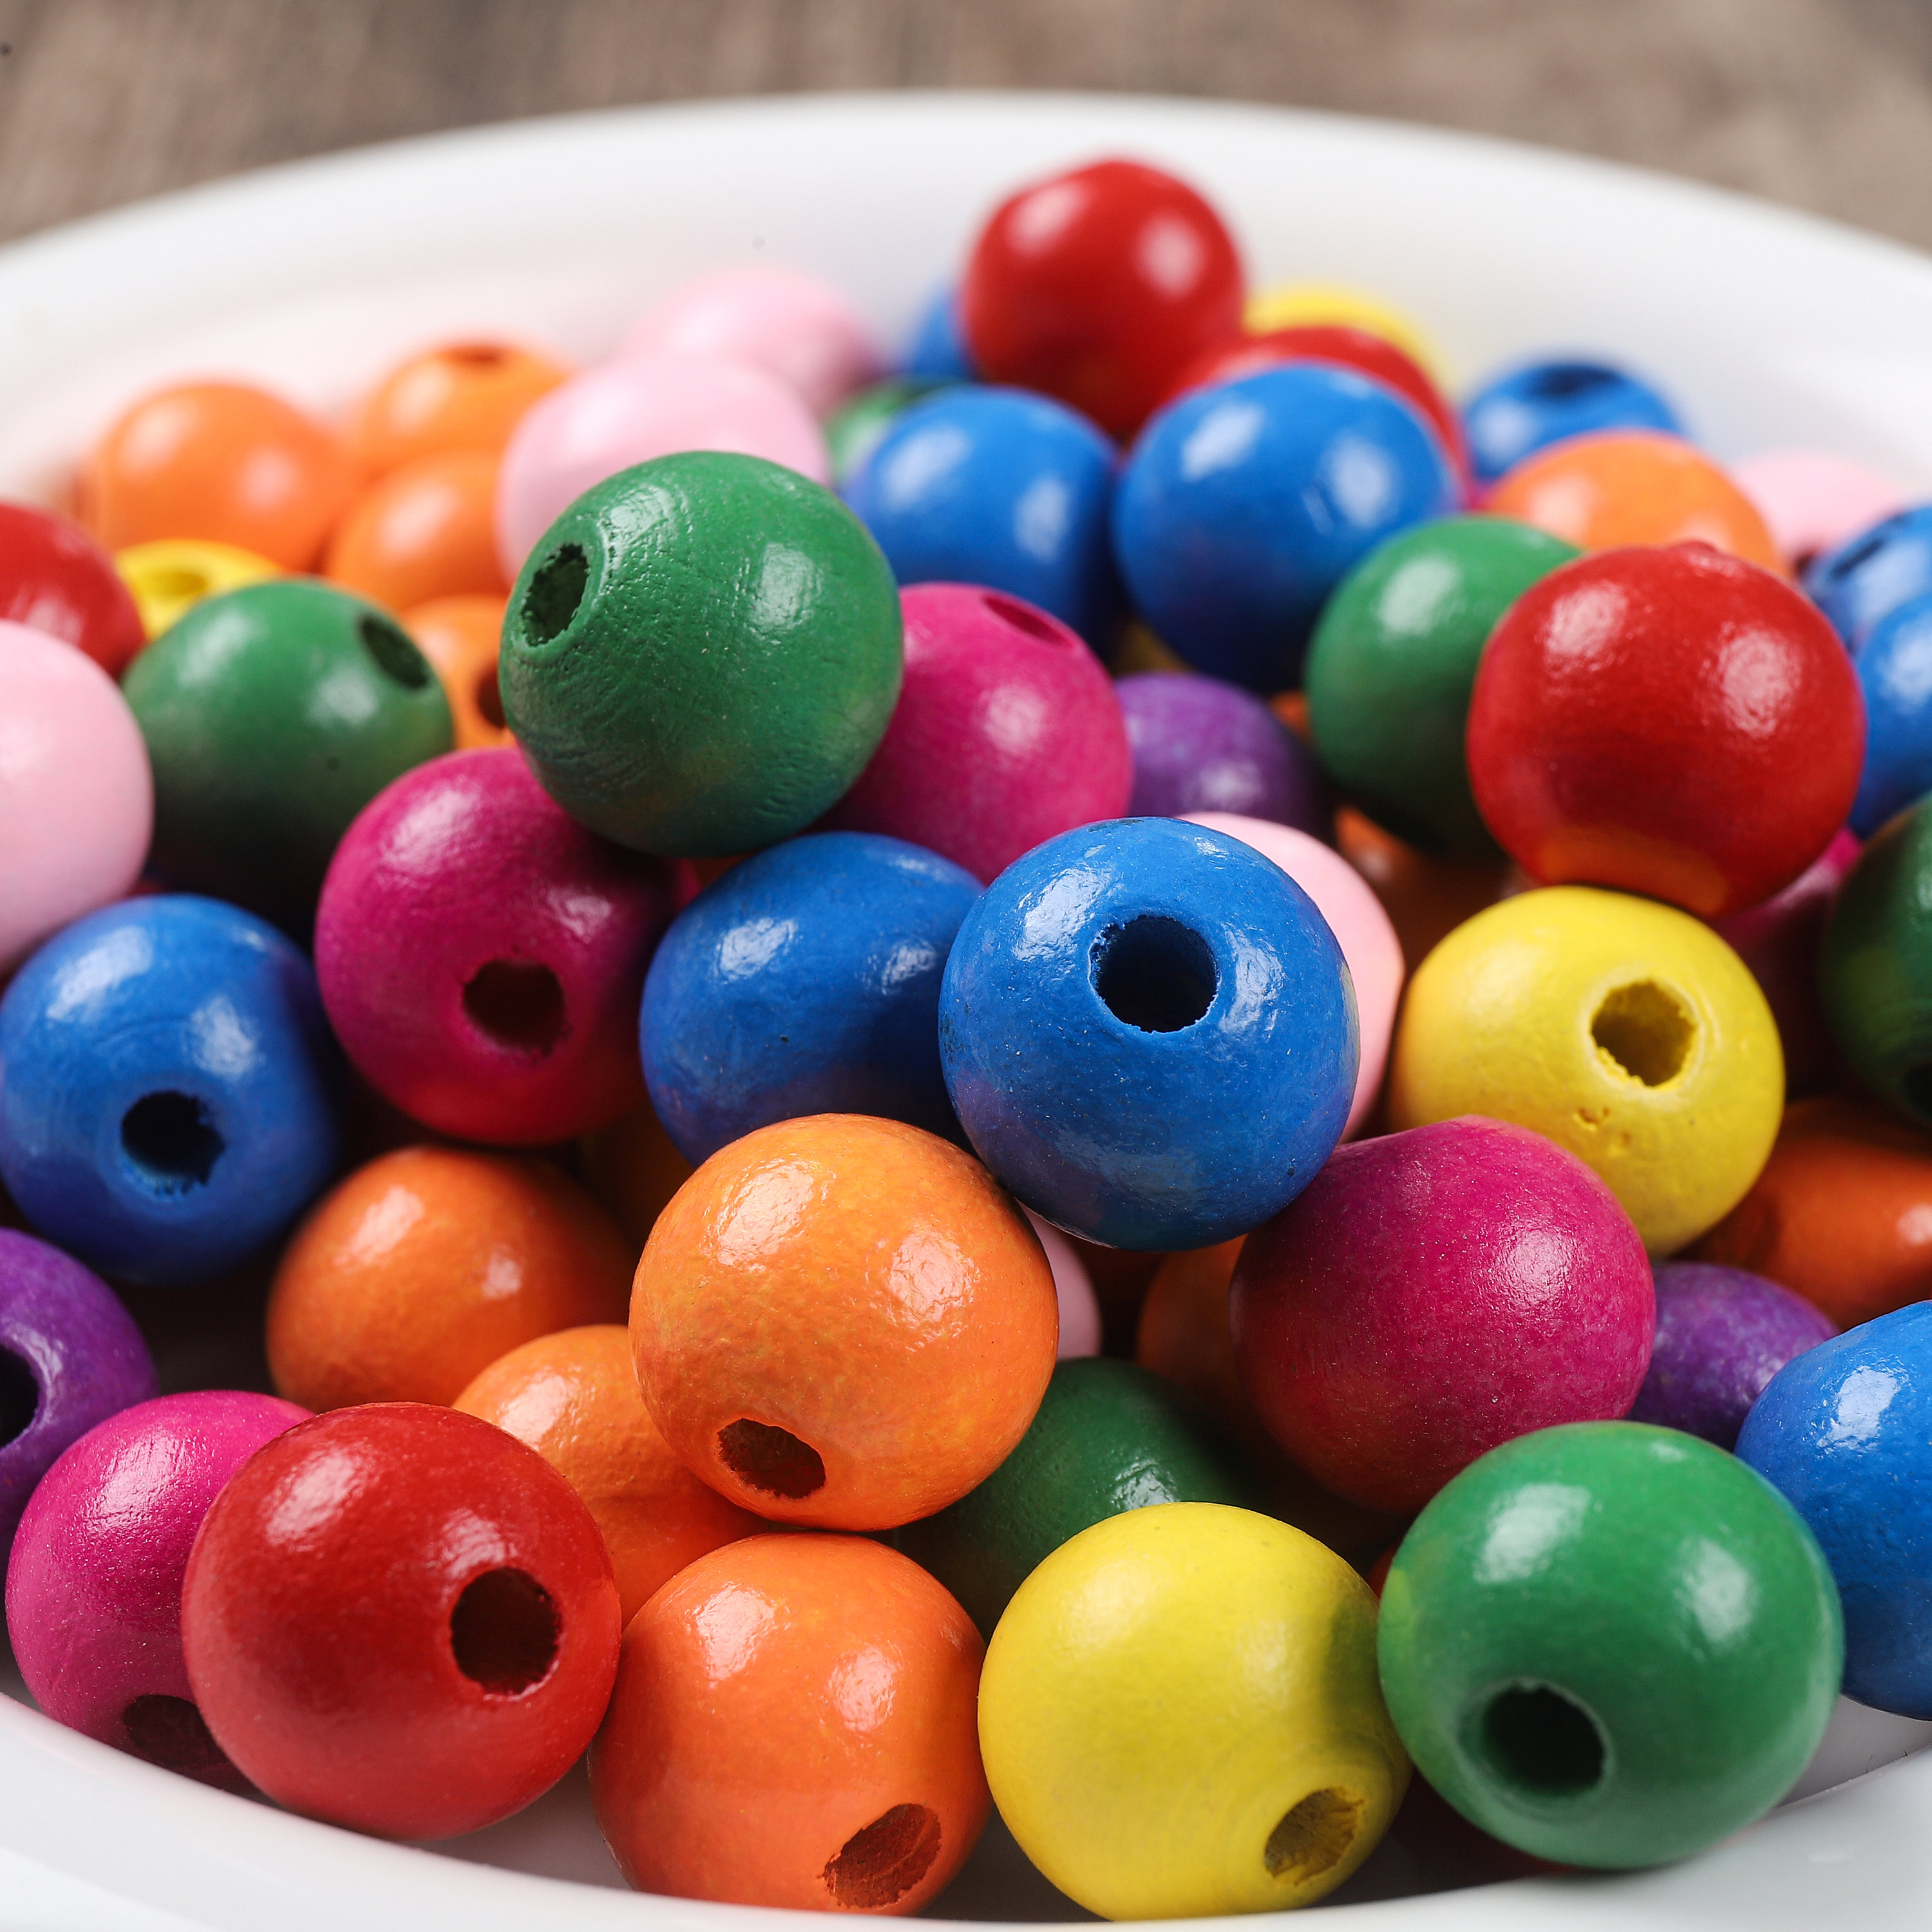 16mm Natural Wood Beads Football 10/20pcs Round Balls Loose Spacer Beads  For Jewelry Making DIY Children Gifts Bracelet Supplies